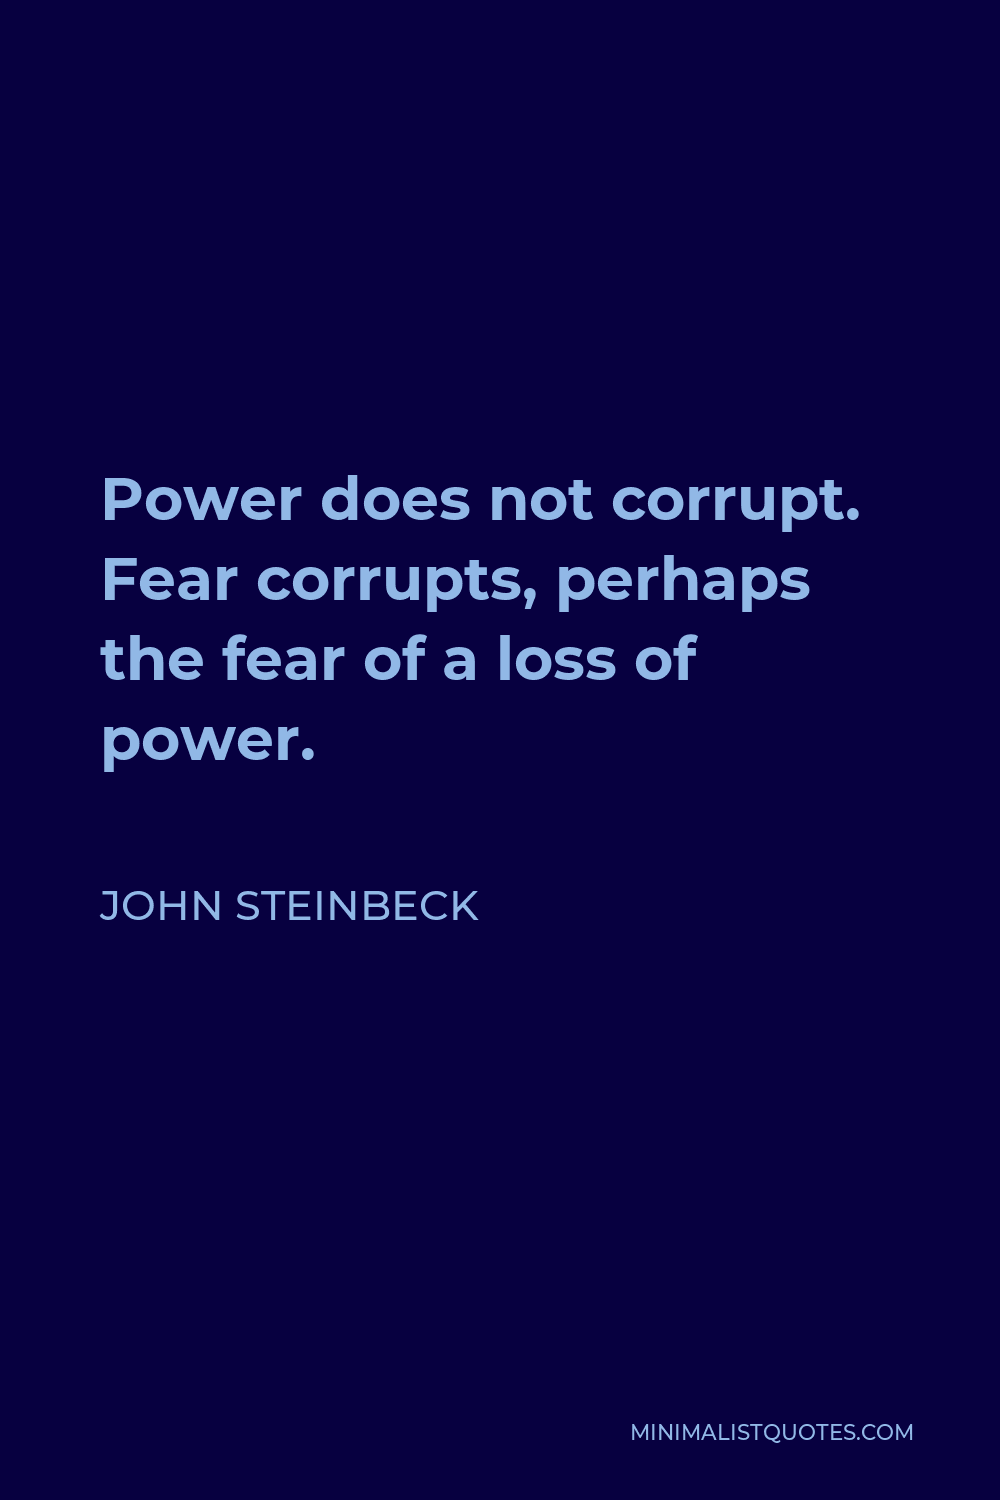 John Steinbeck Quote - Power does not corrupt. Fear corrupts, perhaps the fear of a loss of power.